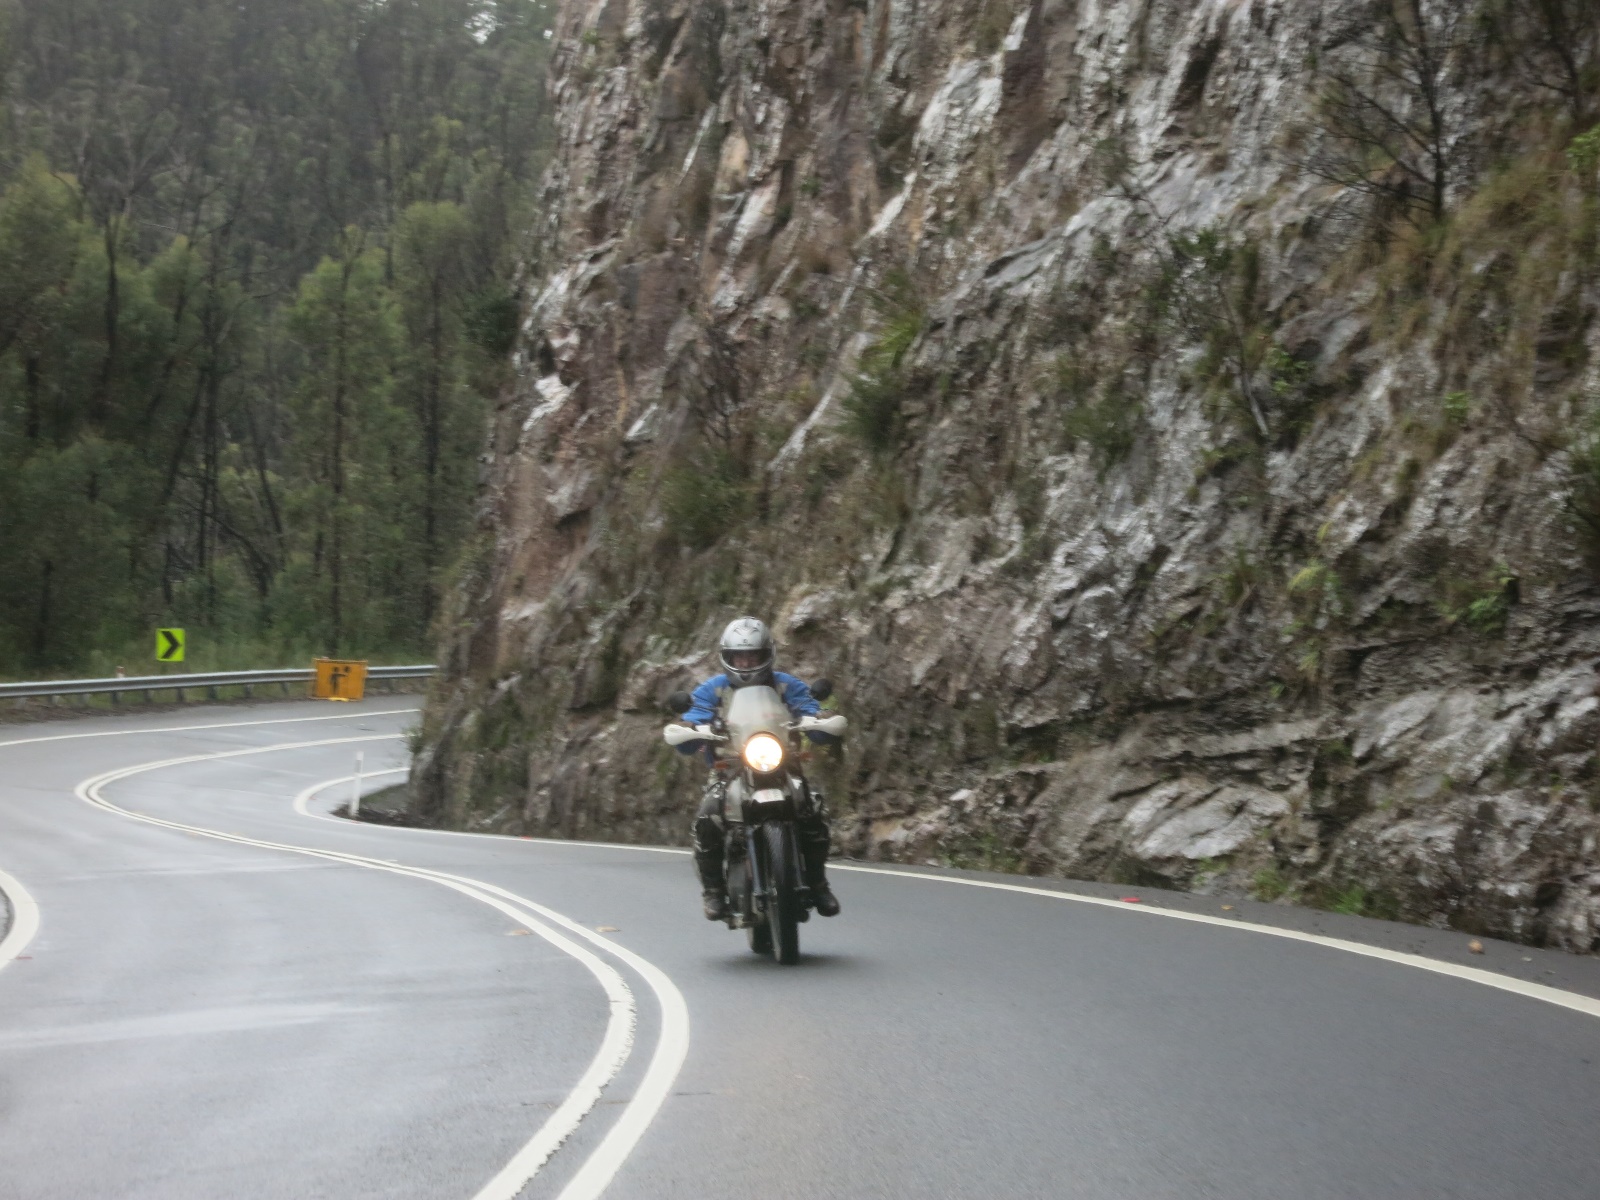 A person riding a motorcycle on a road

Description automatically generated with low confidence